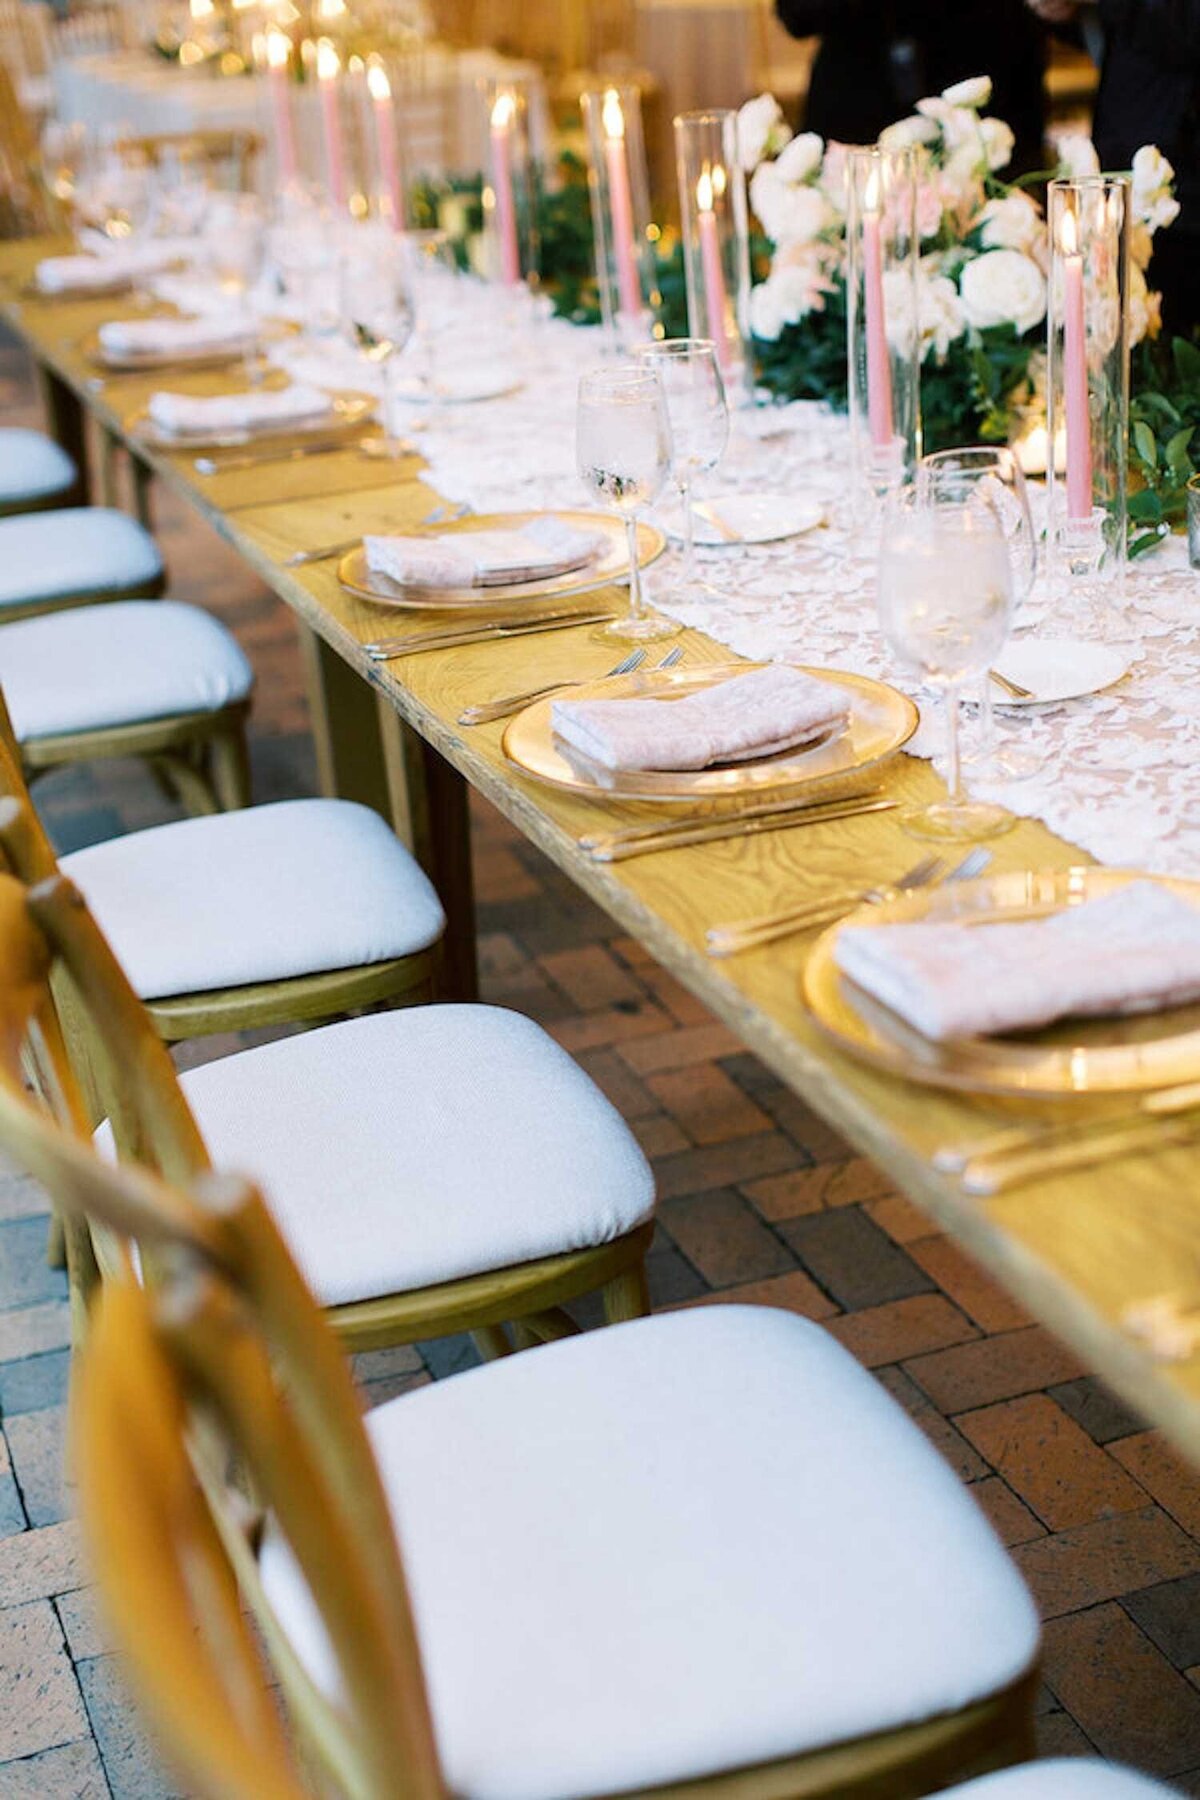 Romantic lace table runner and elegant placesettings at a head table during a luxury Chicago outdoor garden wedding.